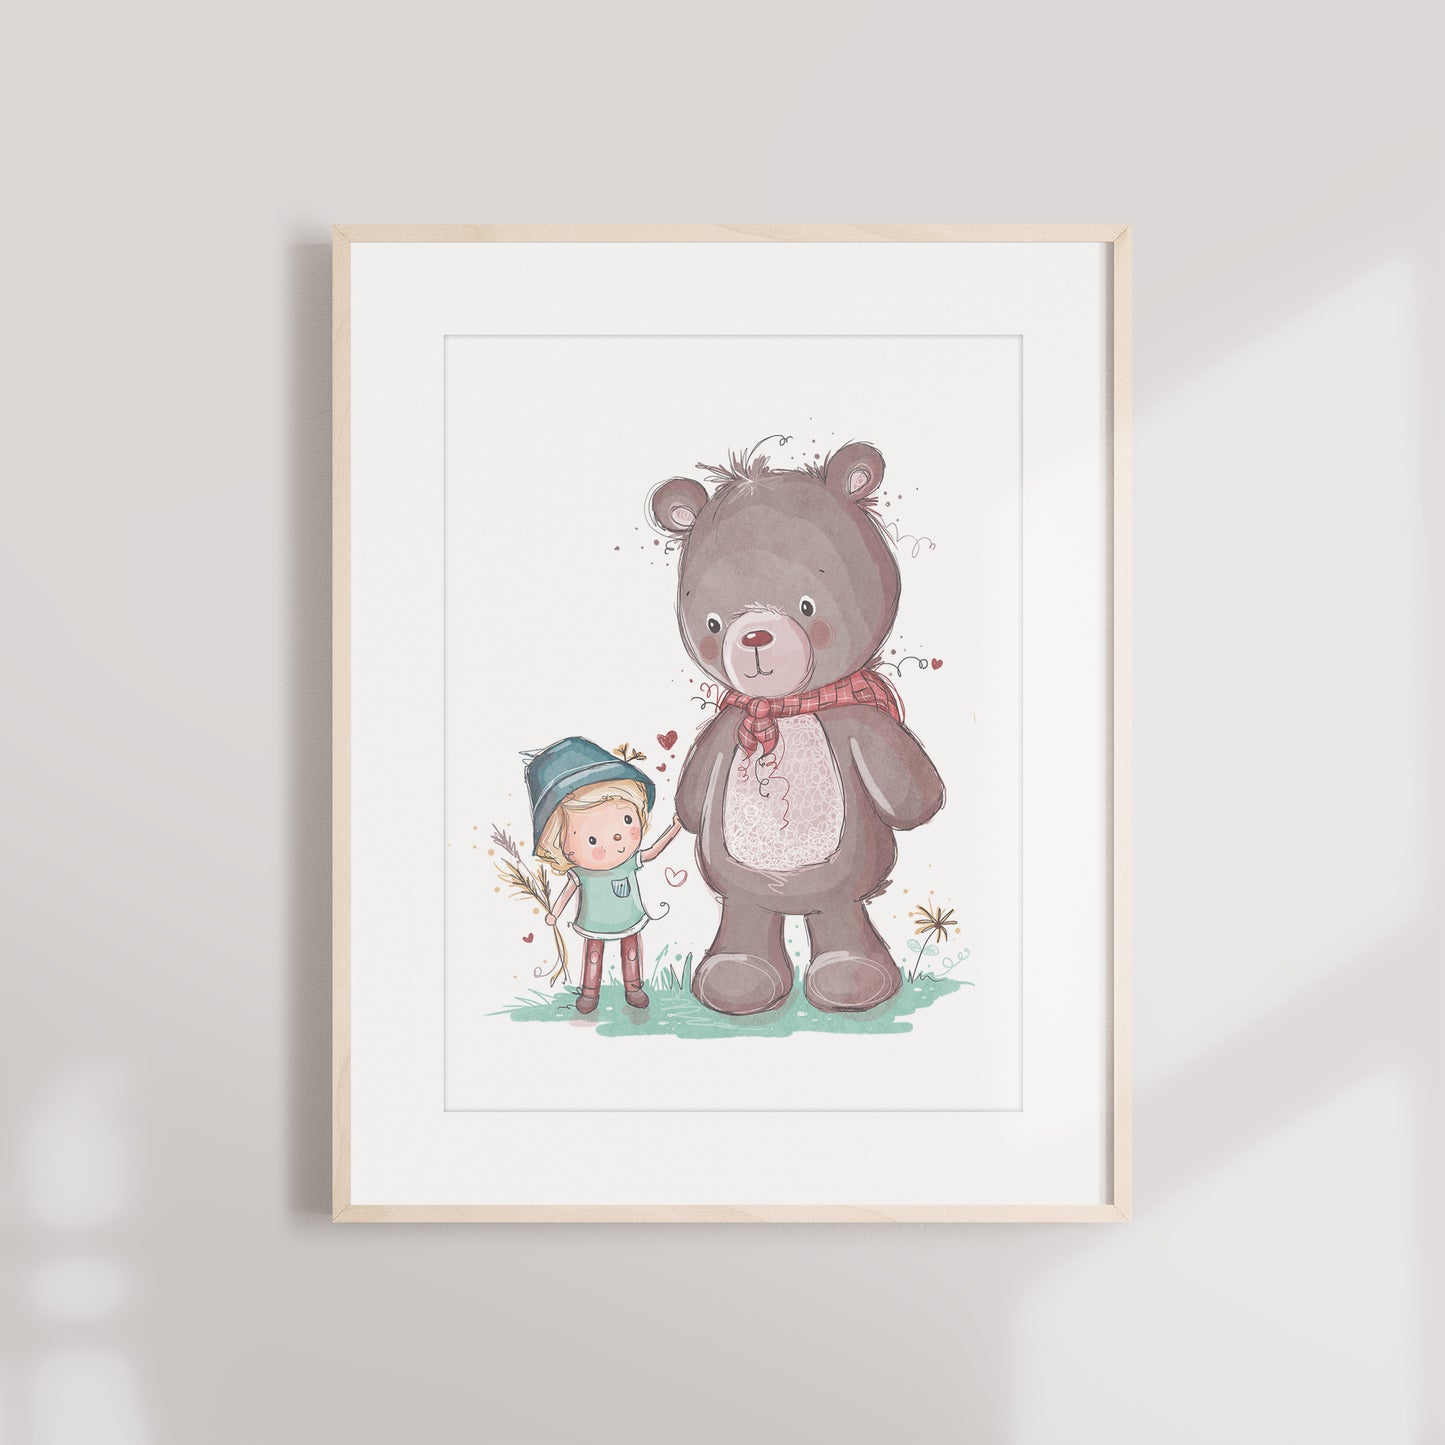 'Camping with Bear' Children's Wall Art Print